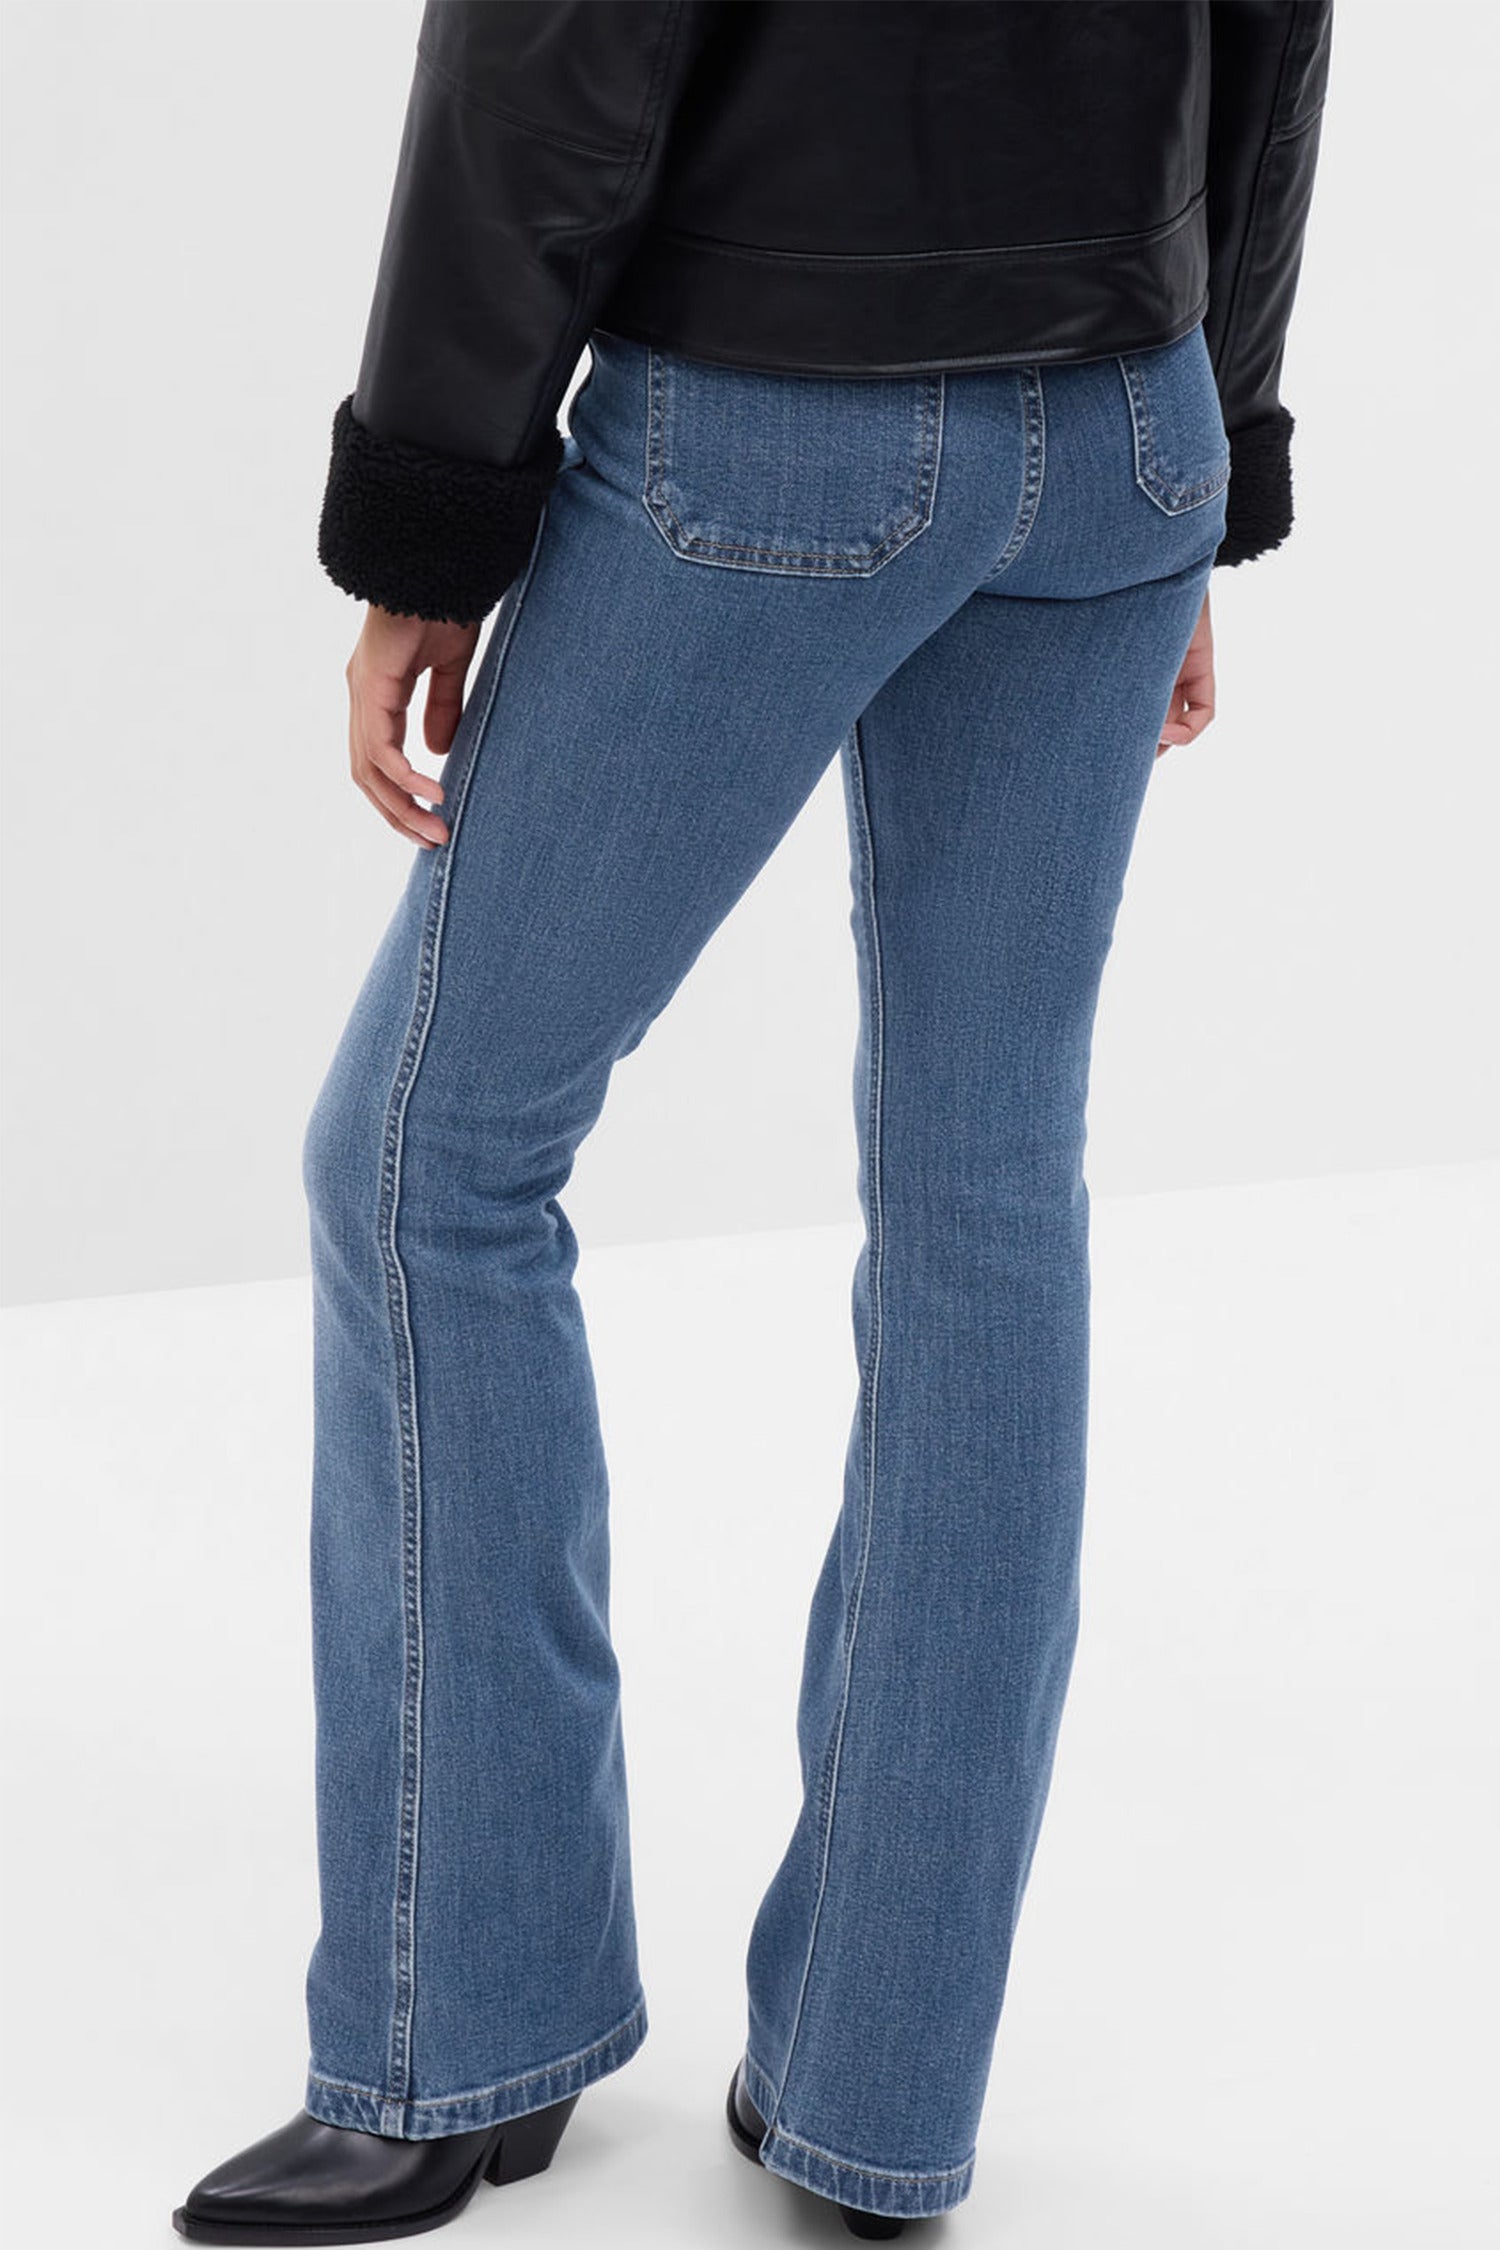 Back image of model wearing blue high rise flare jeans with pockets on back